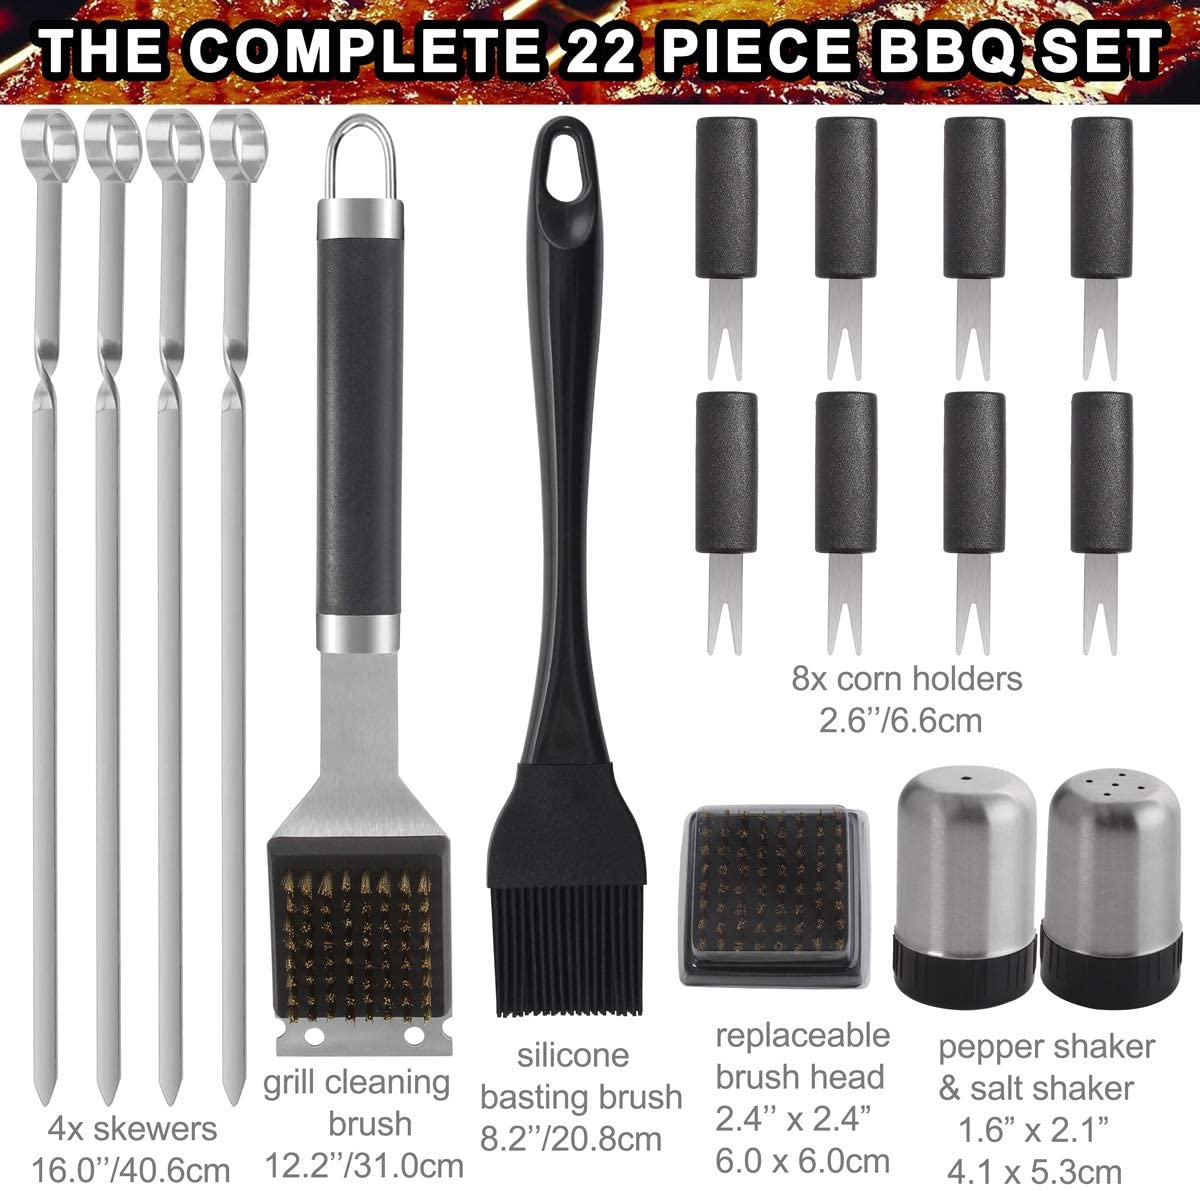 POLIGO 22PCS Camping BBQ Grill Accessories Stainless Steel BBQ Tools Grilling Tools Set - Premium Grill Utensils Set in Case for Father's Day Birthday Presents Ideal Grilling Gifts for Dad Men Women - image 3 of 3